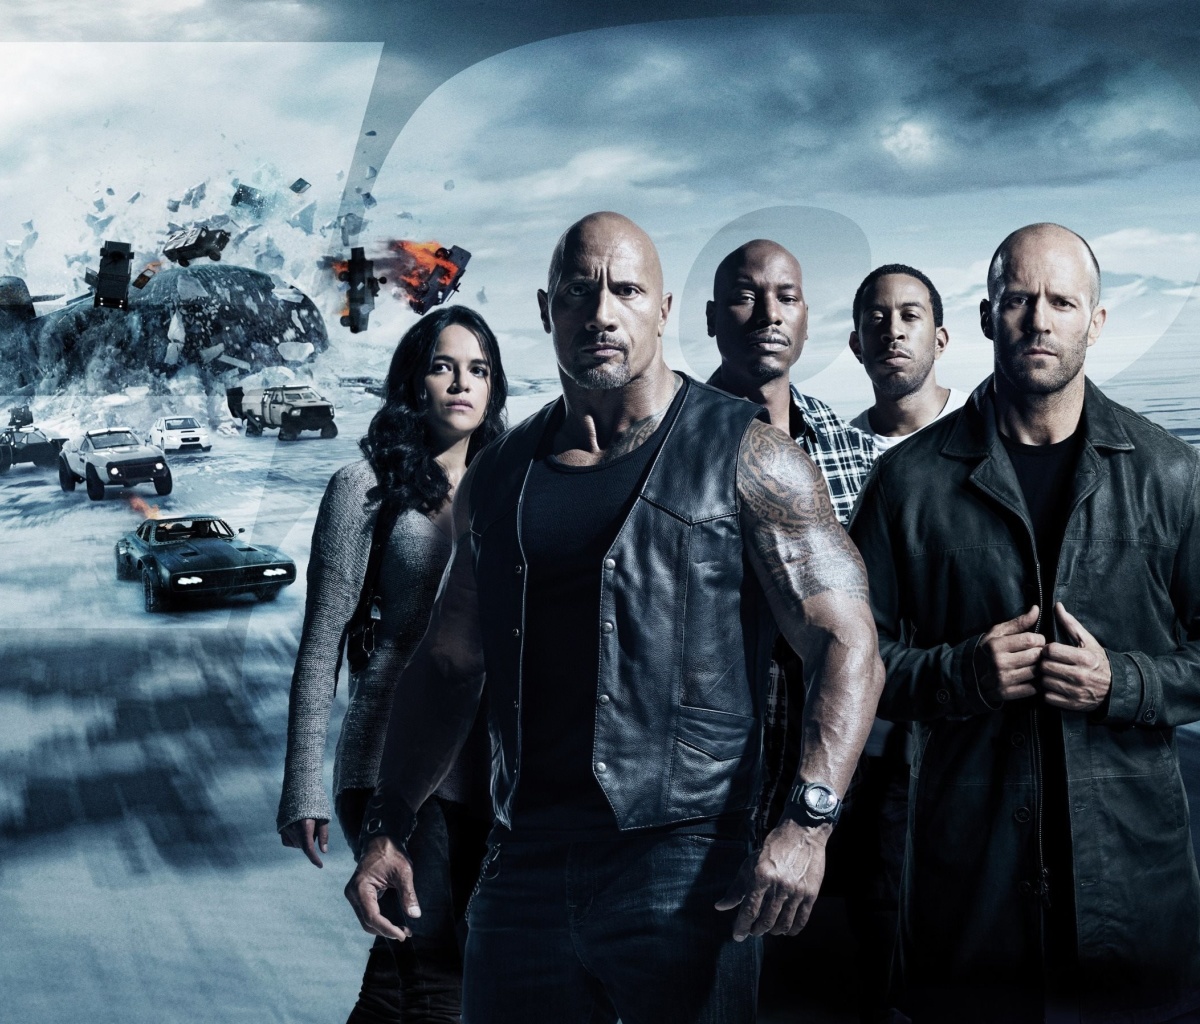 Обои The Fate of the Furious with Vin Diesel, Dwayne Johnson, Charlize Theron 1200x1024